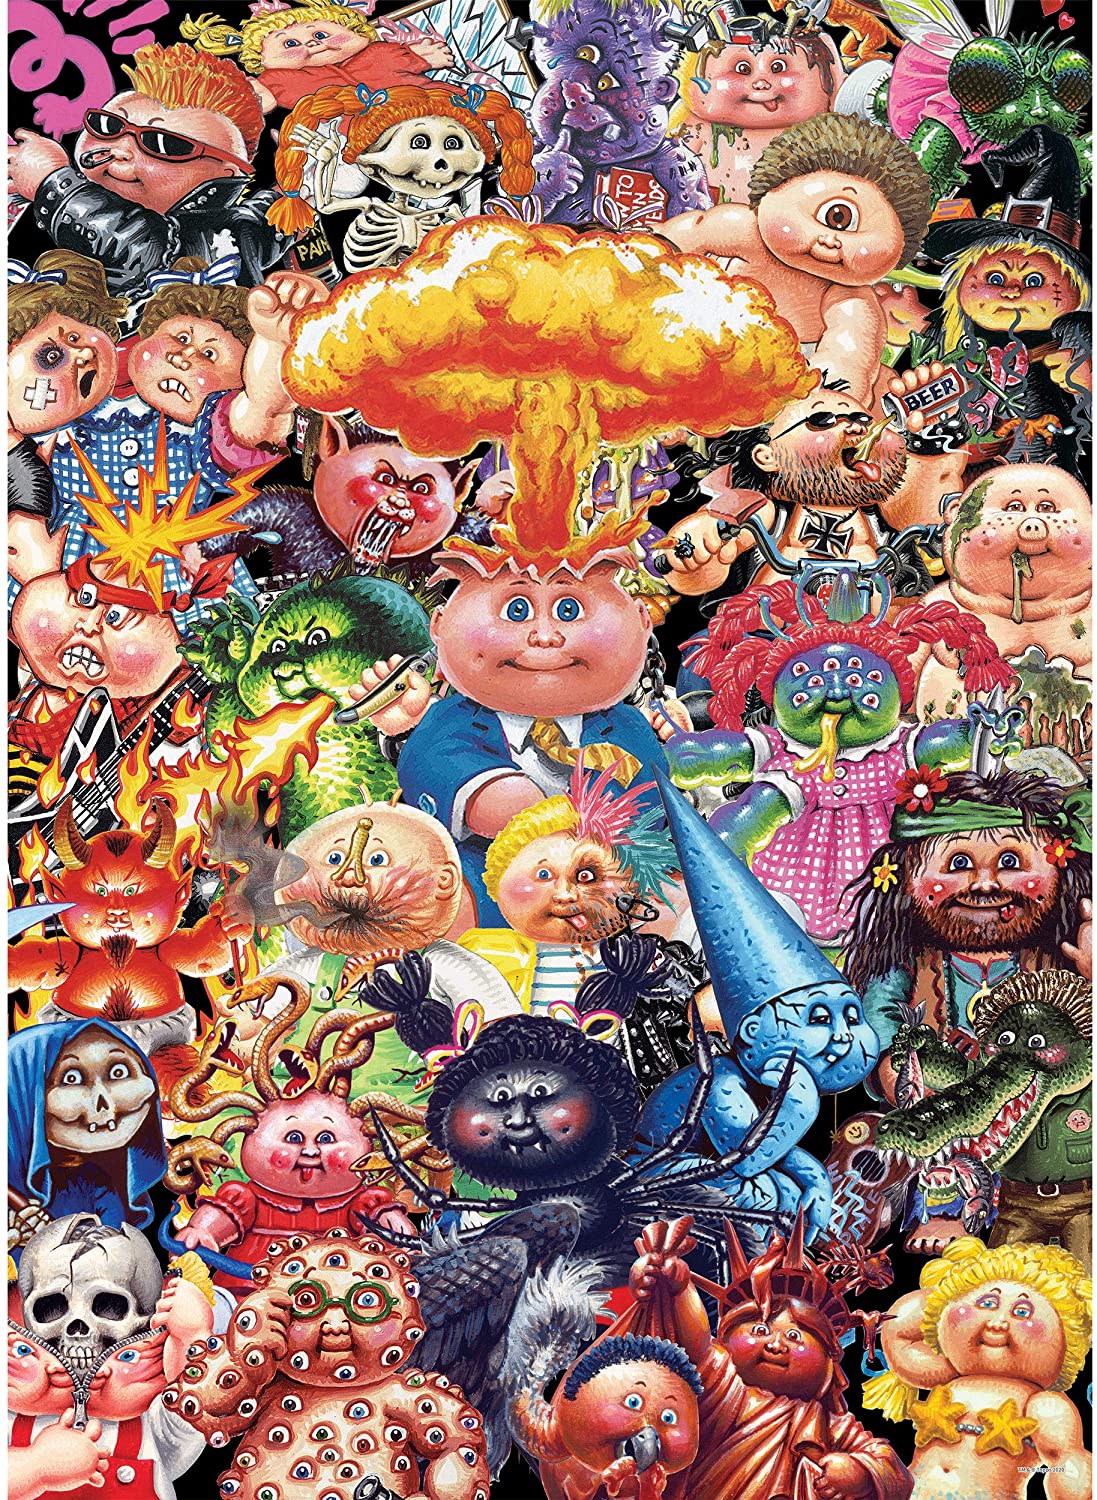 USAOPOLY Garbage Pail Kids Yuck 1000 Piece Jigsaw Puzzle | Collectible Puzzle Featuring Original GPK Favorites